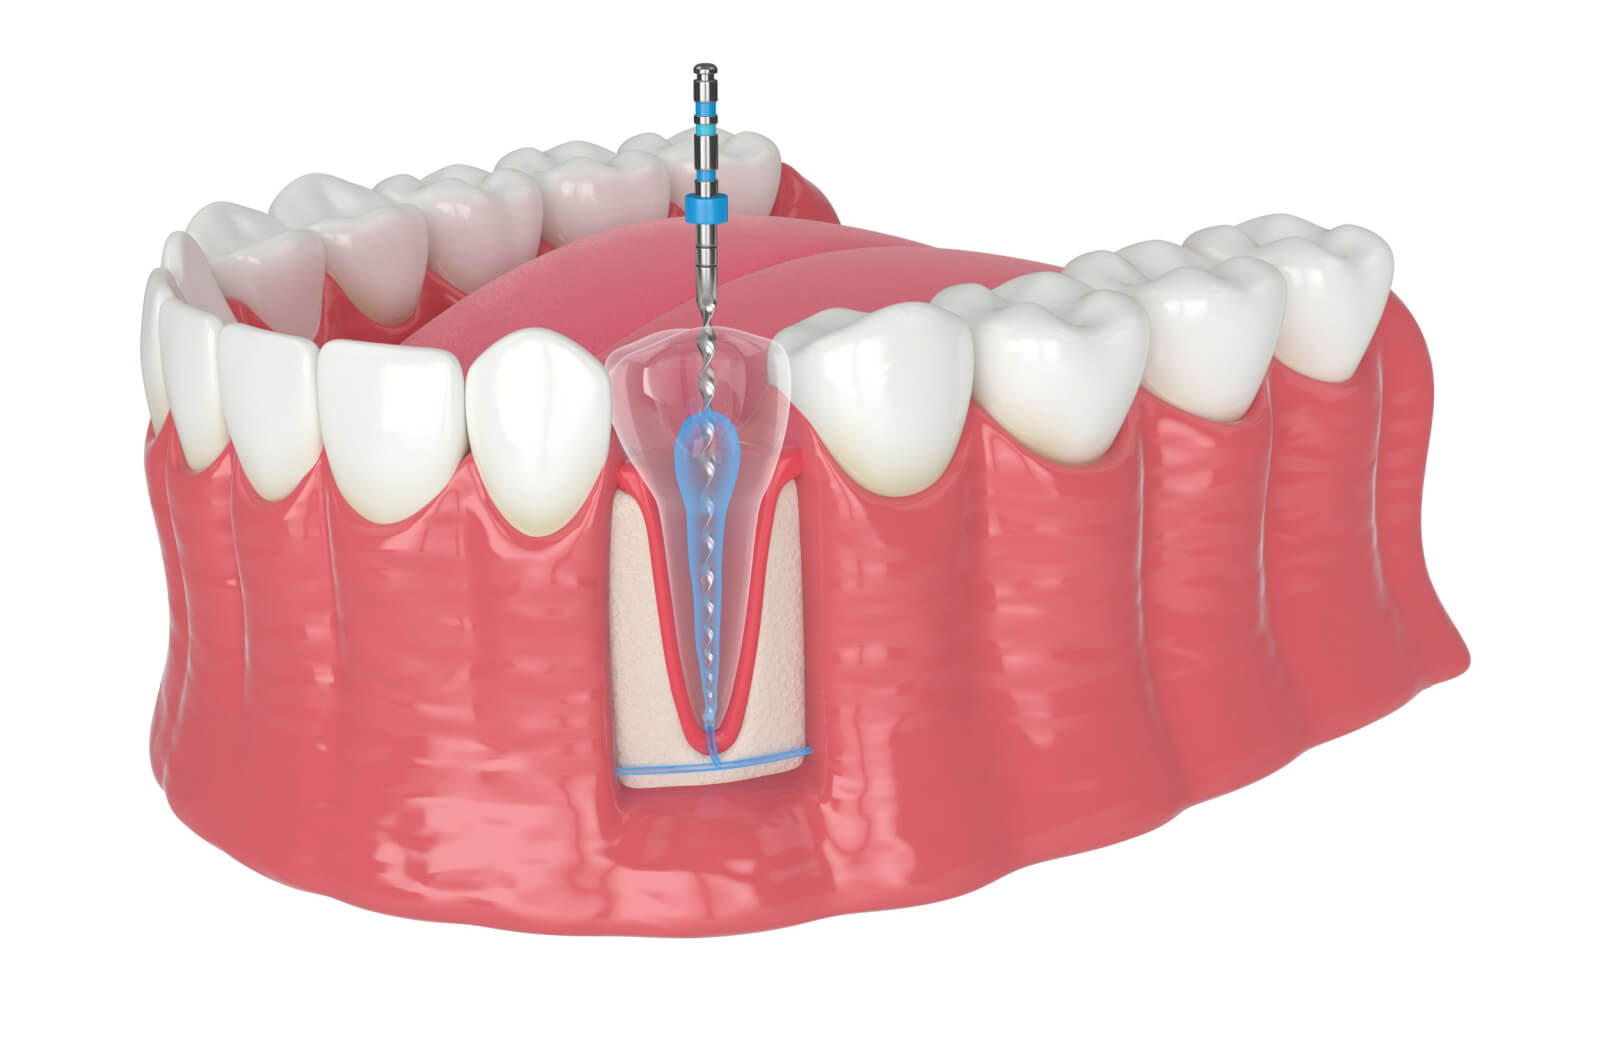 A three-dimensional dental model image illustrates how a root canal is being done